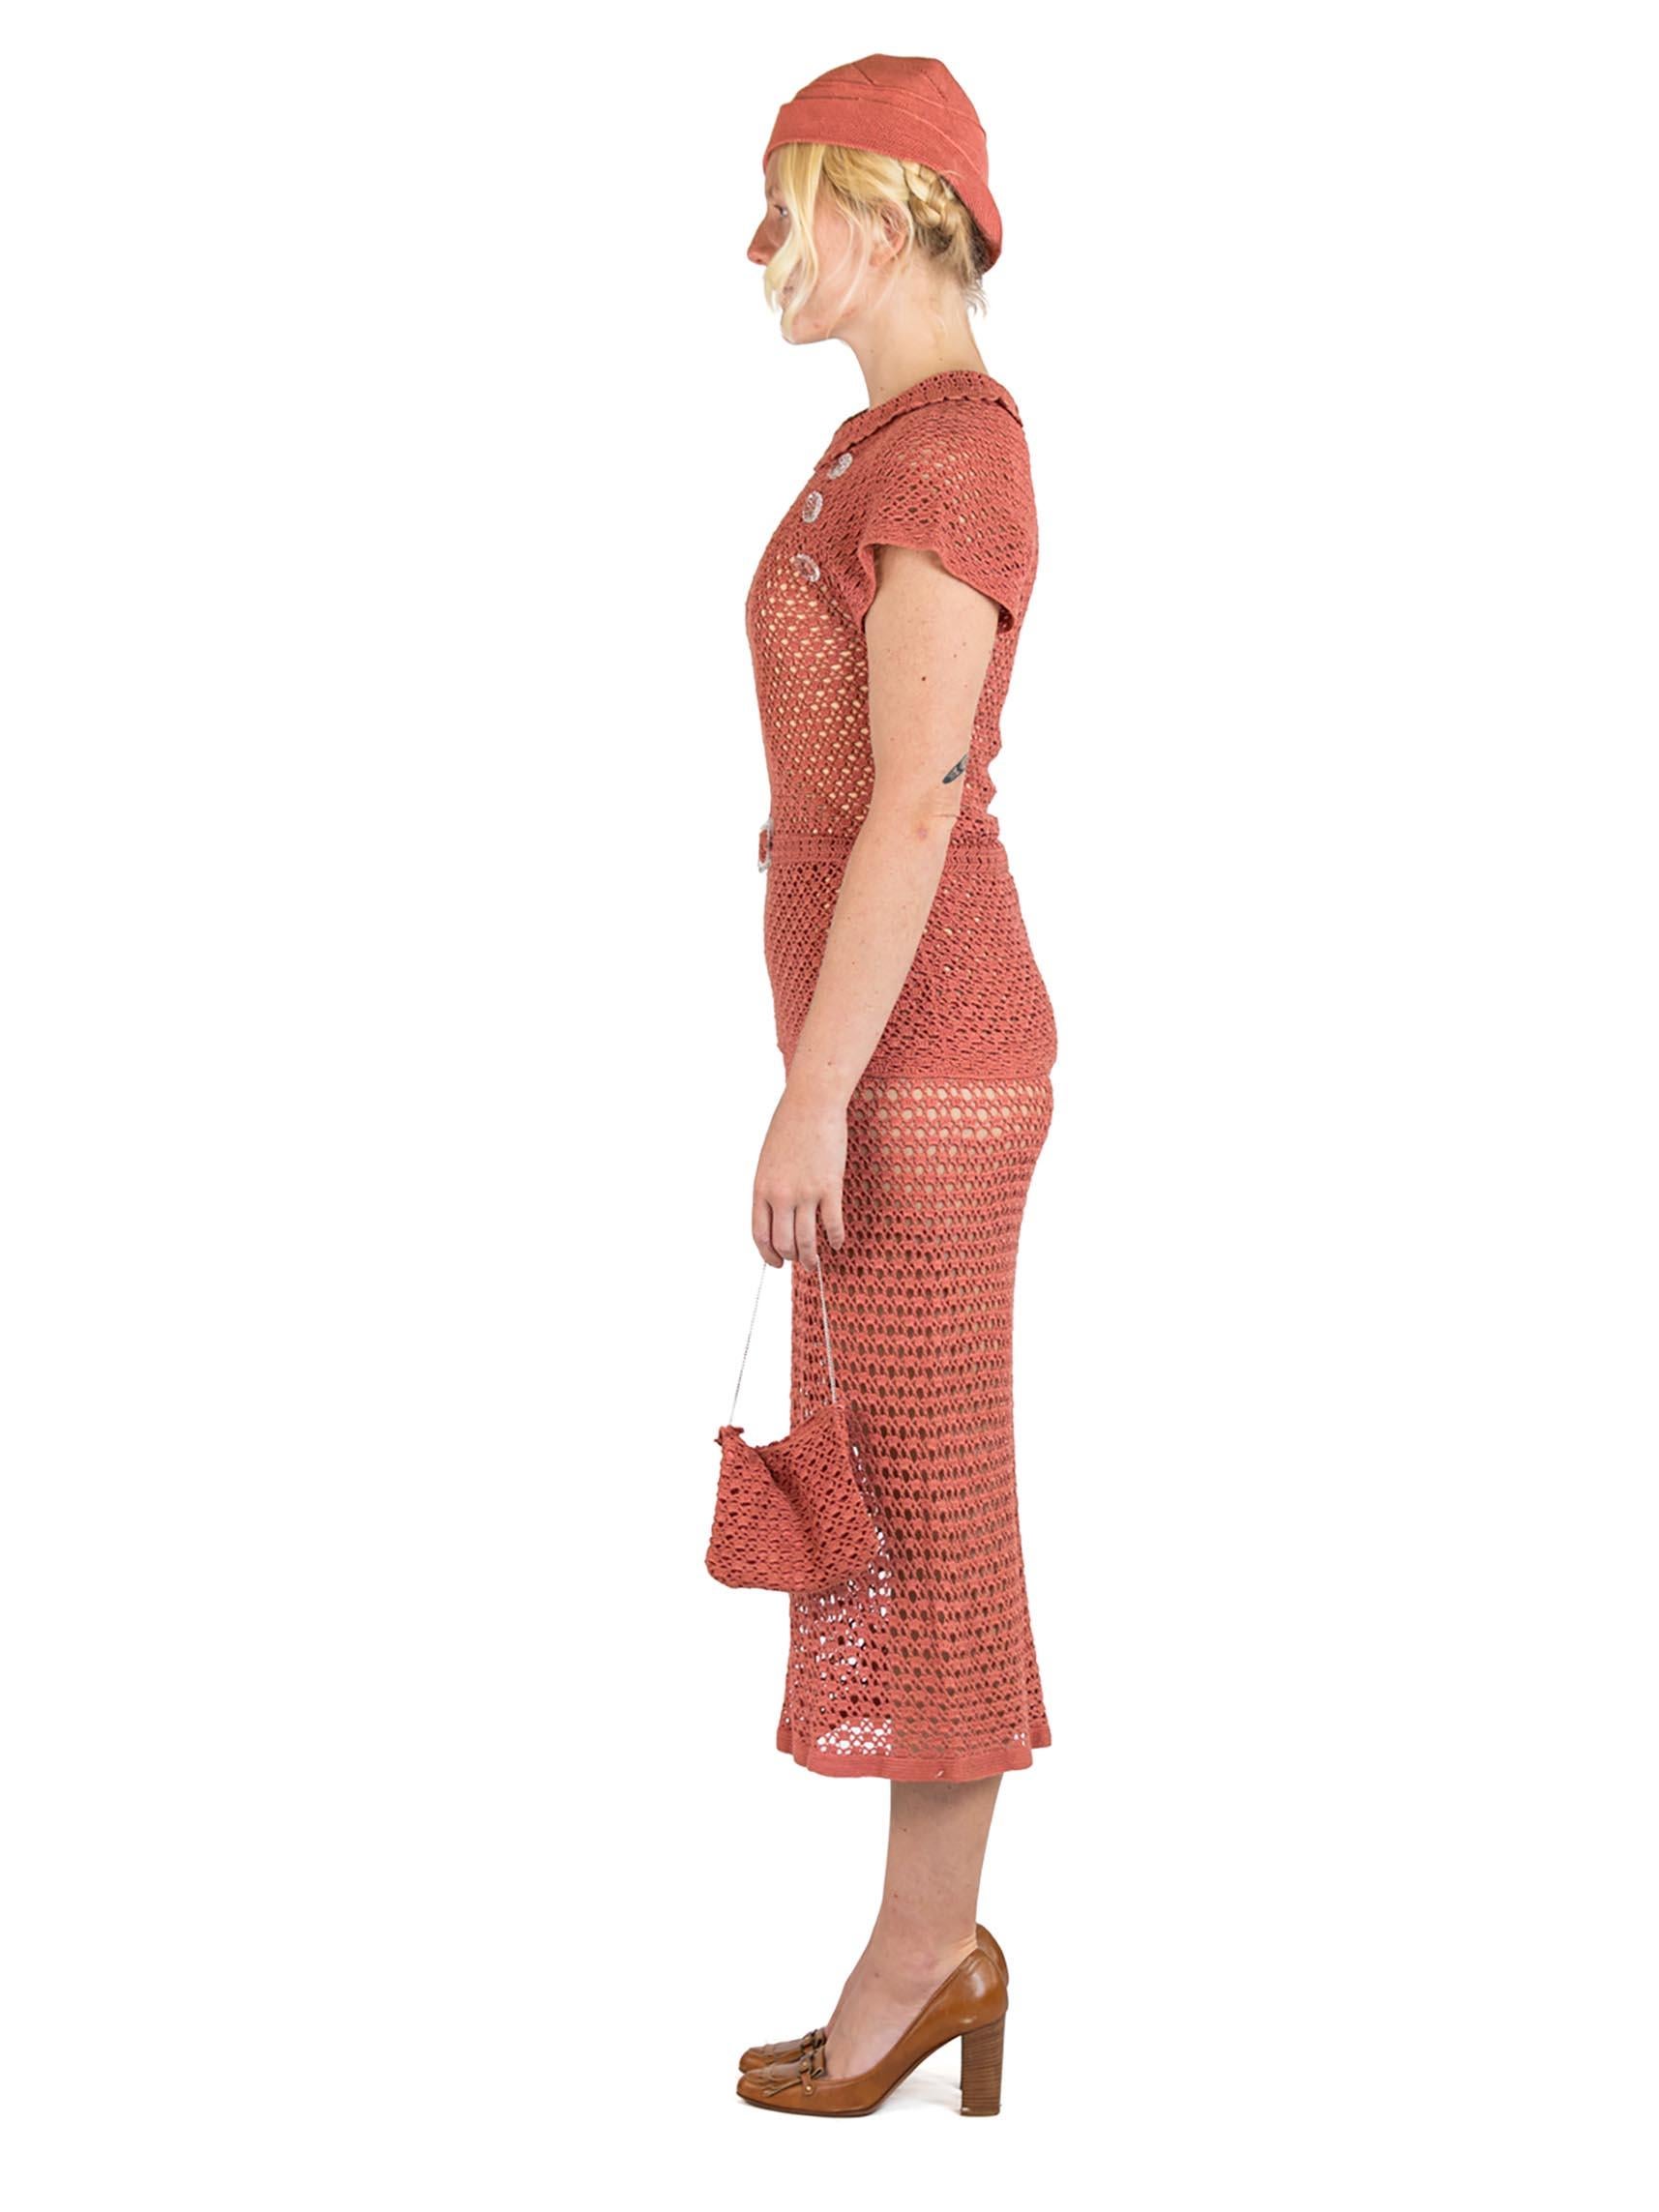 1930S Dusty Rose Cotton Hand-Knit Skirt & Top Ensemble With Belt, Purse Hat For Sale 4